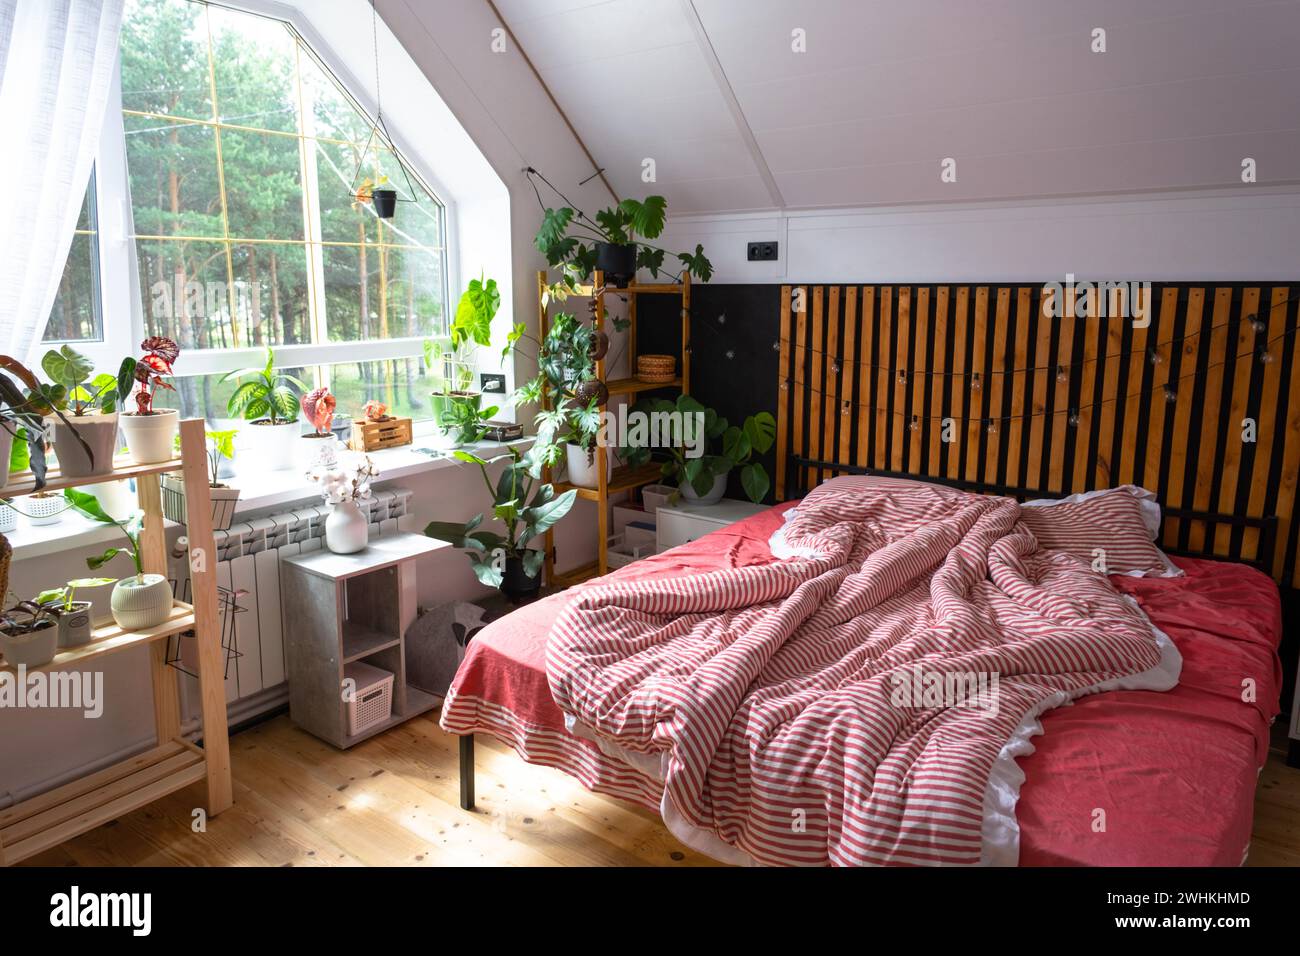 Unmade bed with red striped linen and a mess in Loft style bedroom interior, black wall with wooden slats, metal bed, potted pla Stock Photo